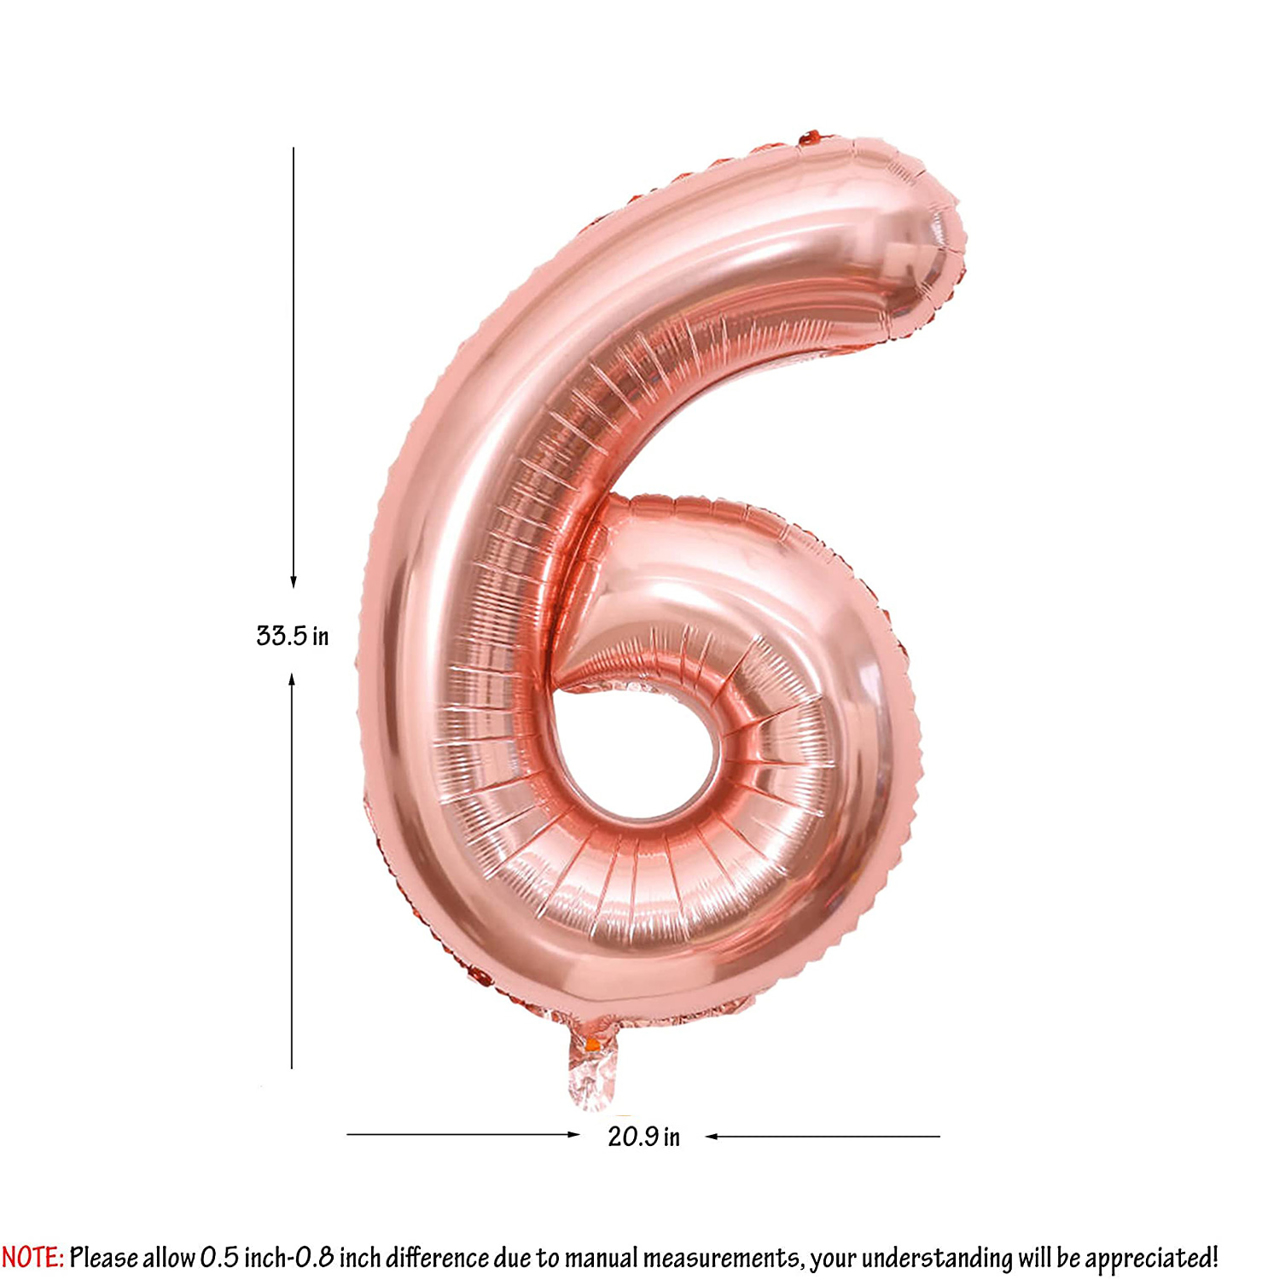 Picture of 40'' Foil Balloon Shape Number 6 - Rose Gold (1pc)